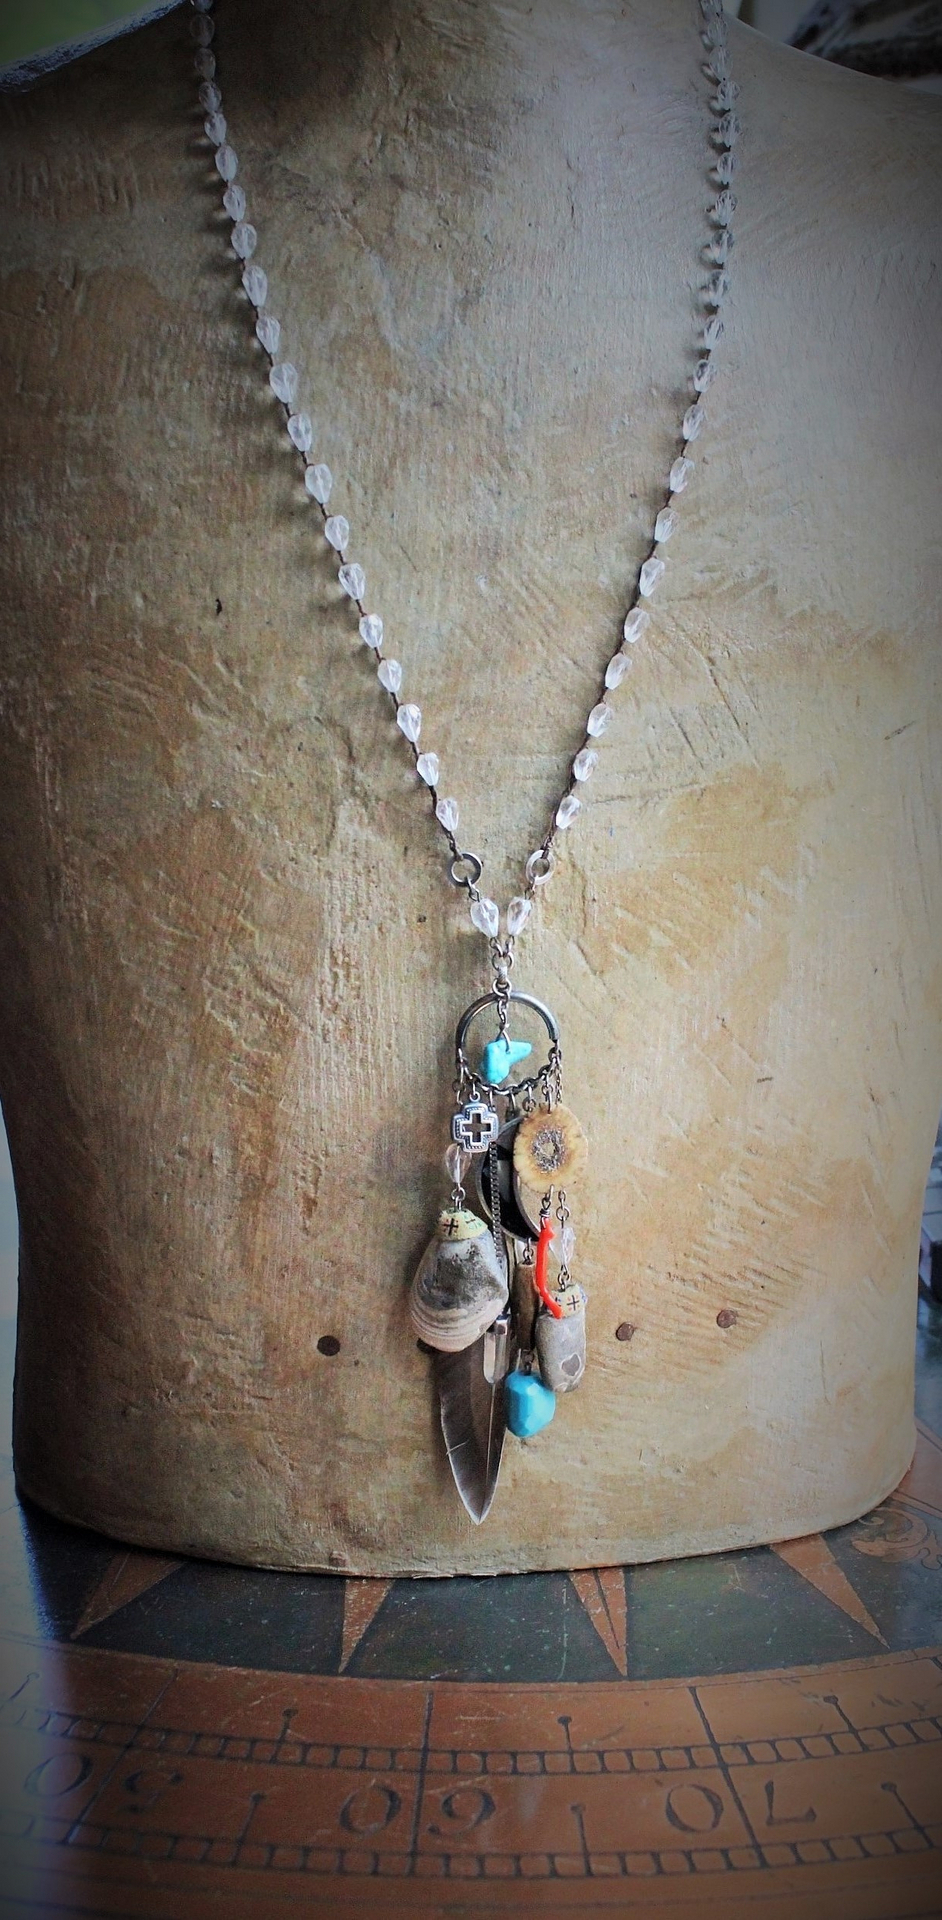 The 4 Elements Amulet Necklace w/Hand Crocheted Rock Crystal Bead Chain, Ancient Shell Fossils,Antique Sterling Inlay Crescent Moon,Rare Faceted Turquoise Nugget,Sterling 4 Way Cross & More!